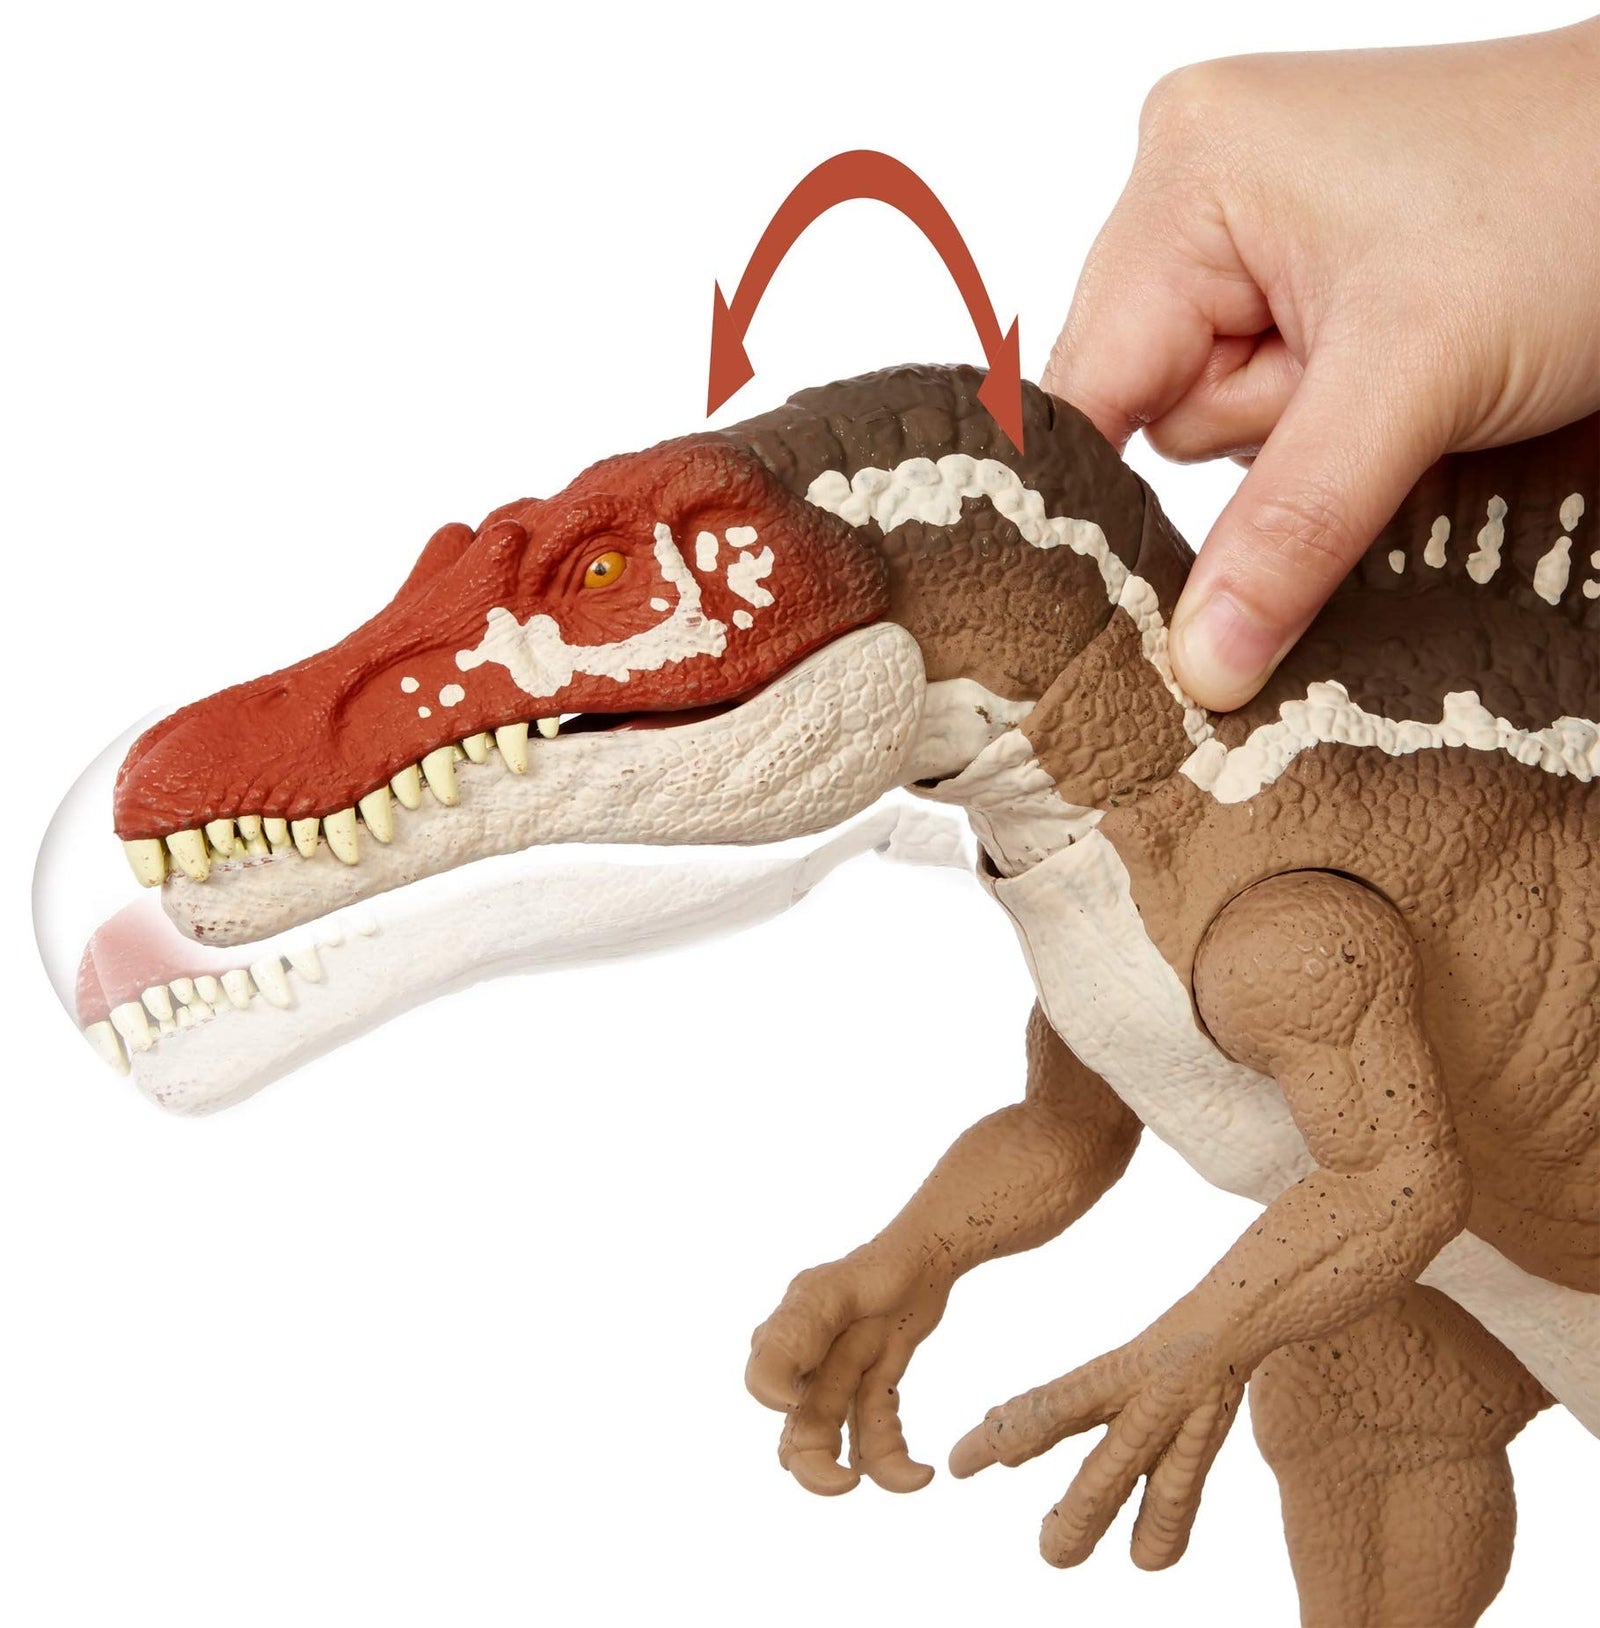 Jurassic World Extreme Chompin' Spinosaurus Dinosaur Action Figure, Huge Bite, Authentic Decoration, Movable Joints, Ages 4 Years Old & Up